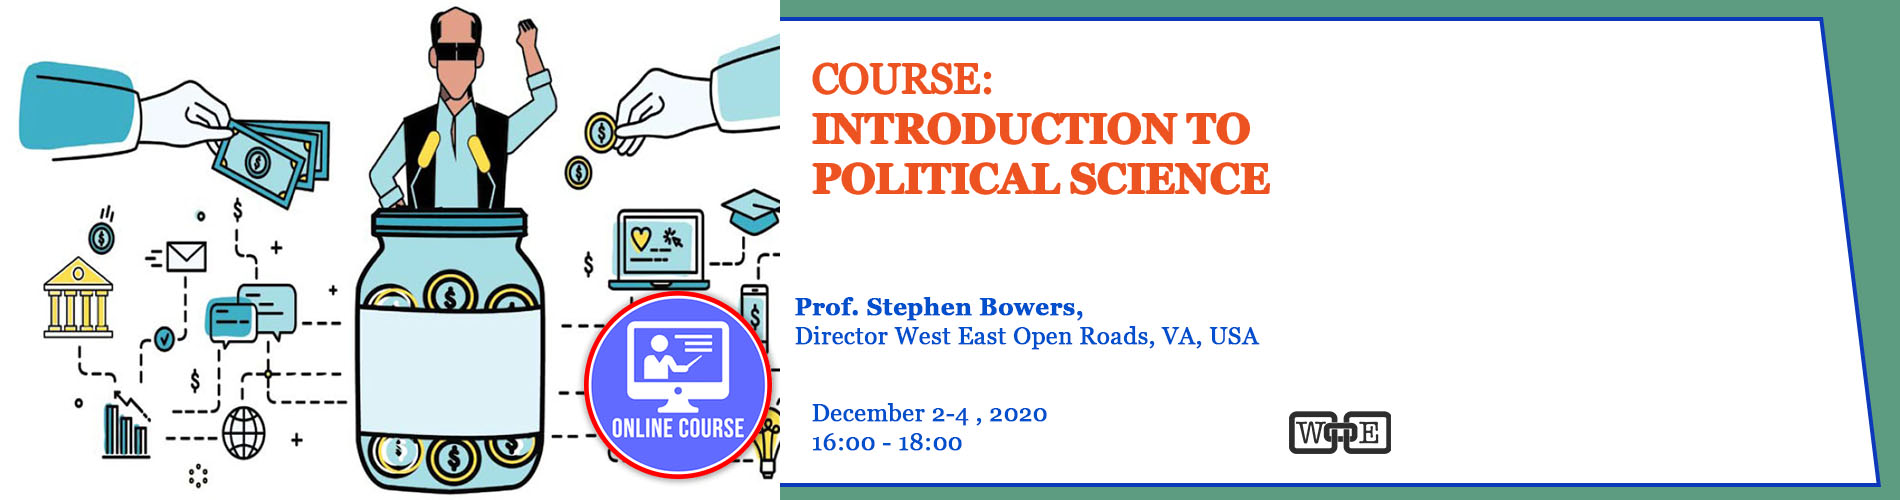 2-4.12.2020-Introduction to Political Science